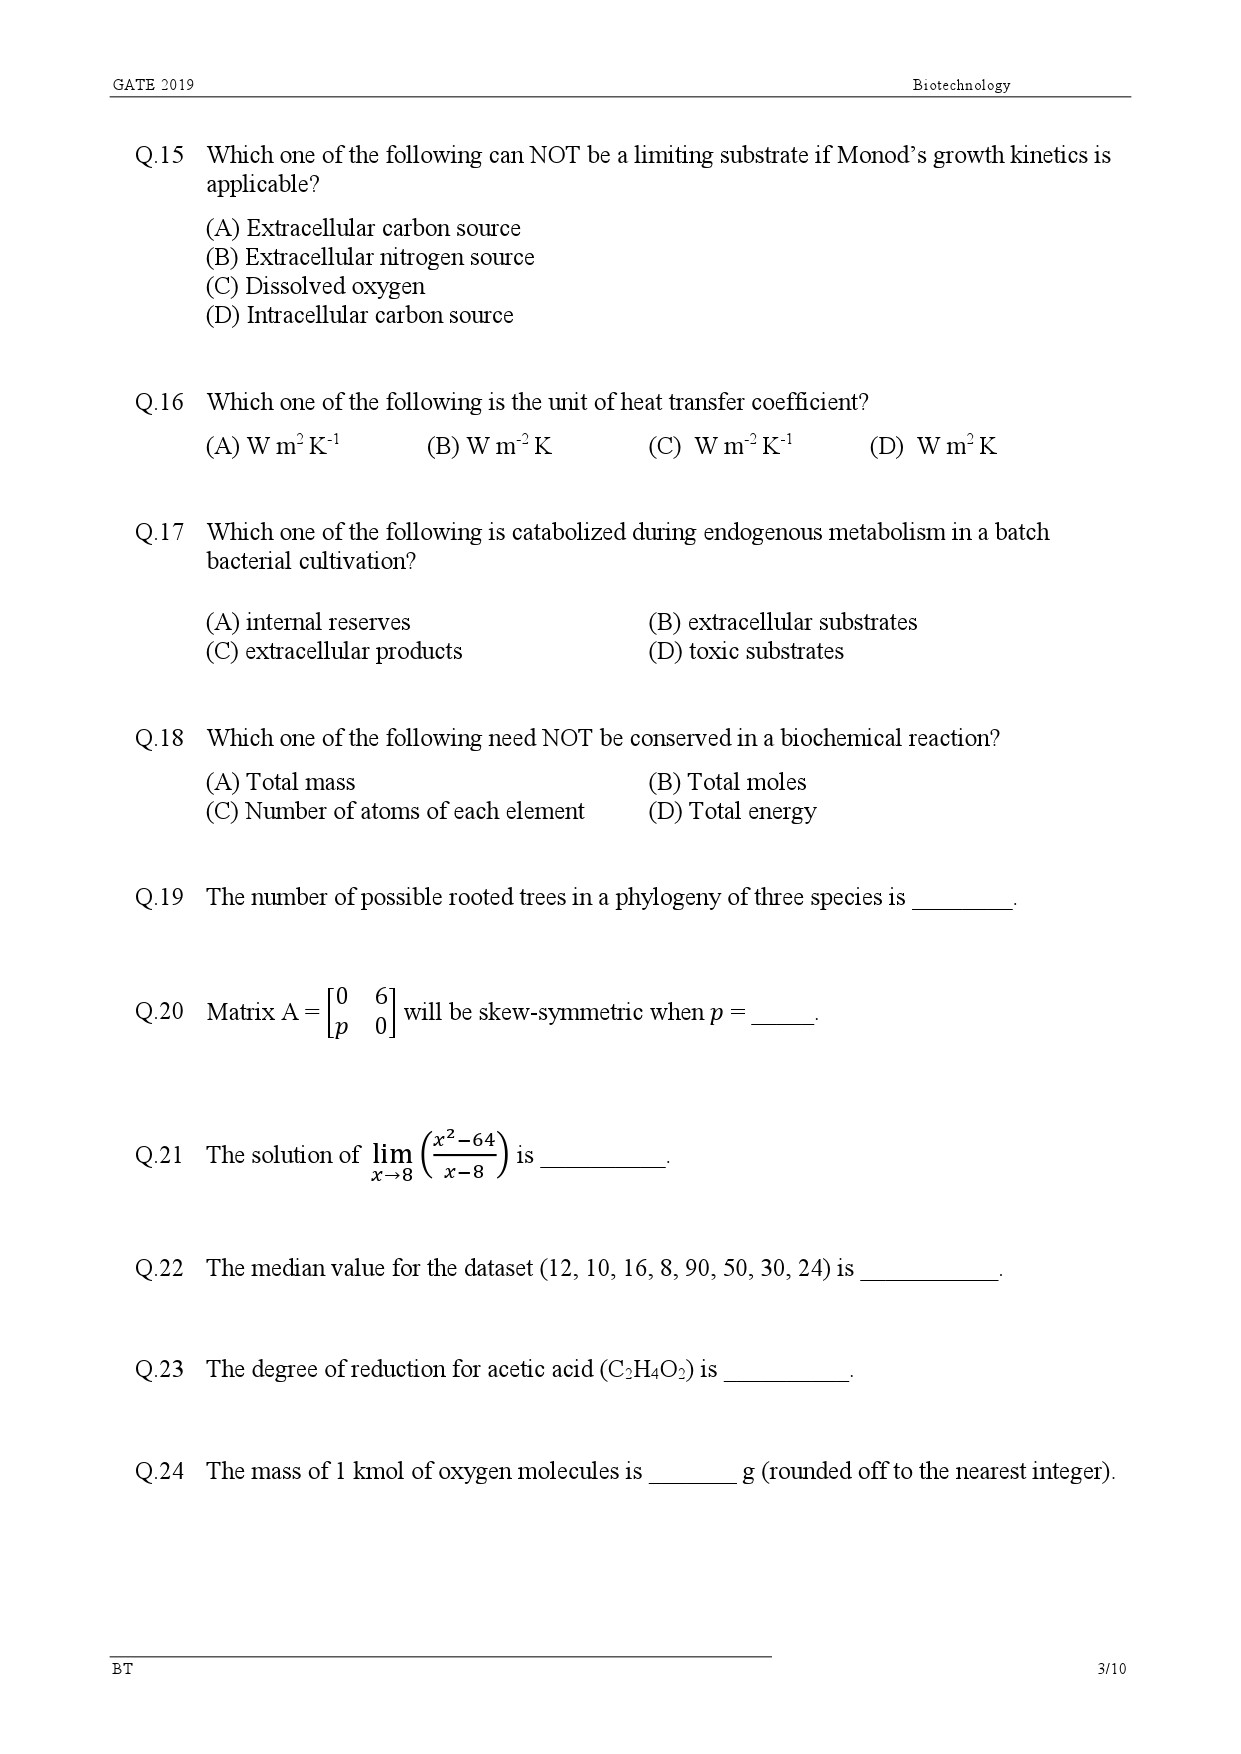 GATE Exam Question Paper 2019 Biotechnology 6